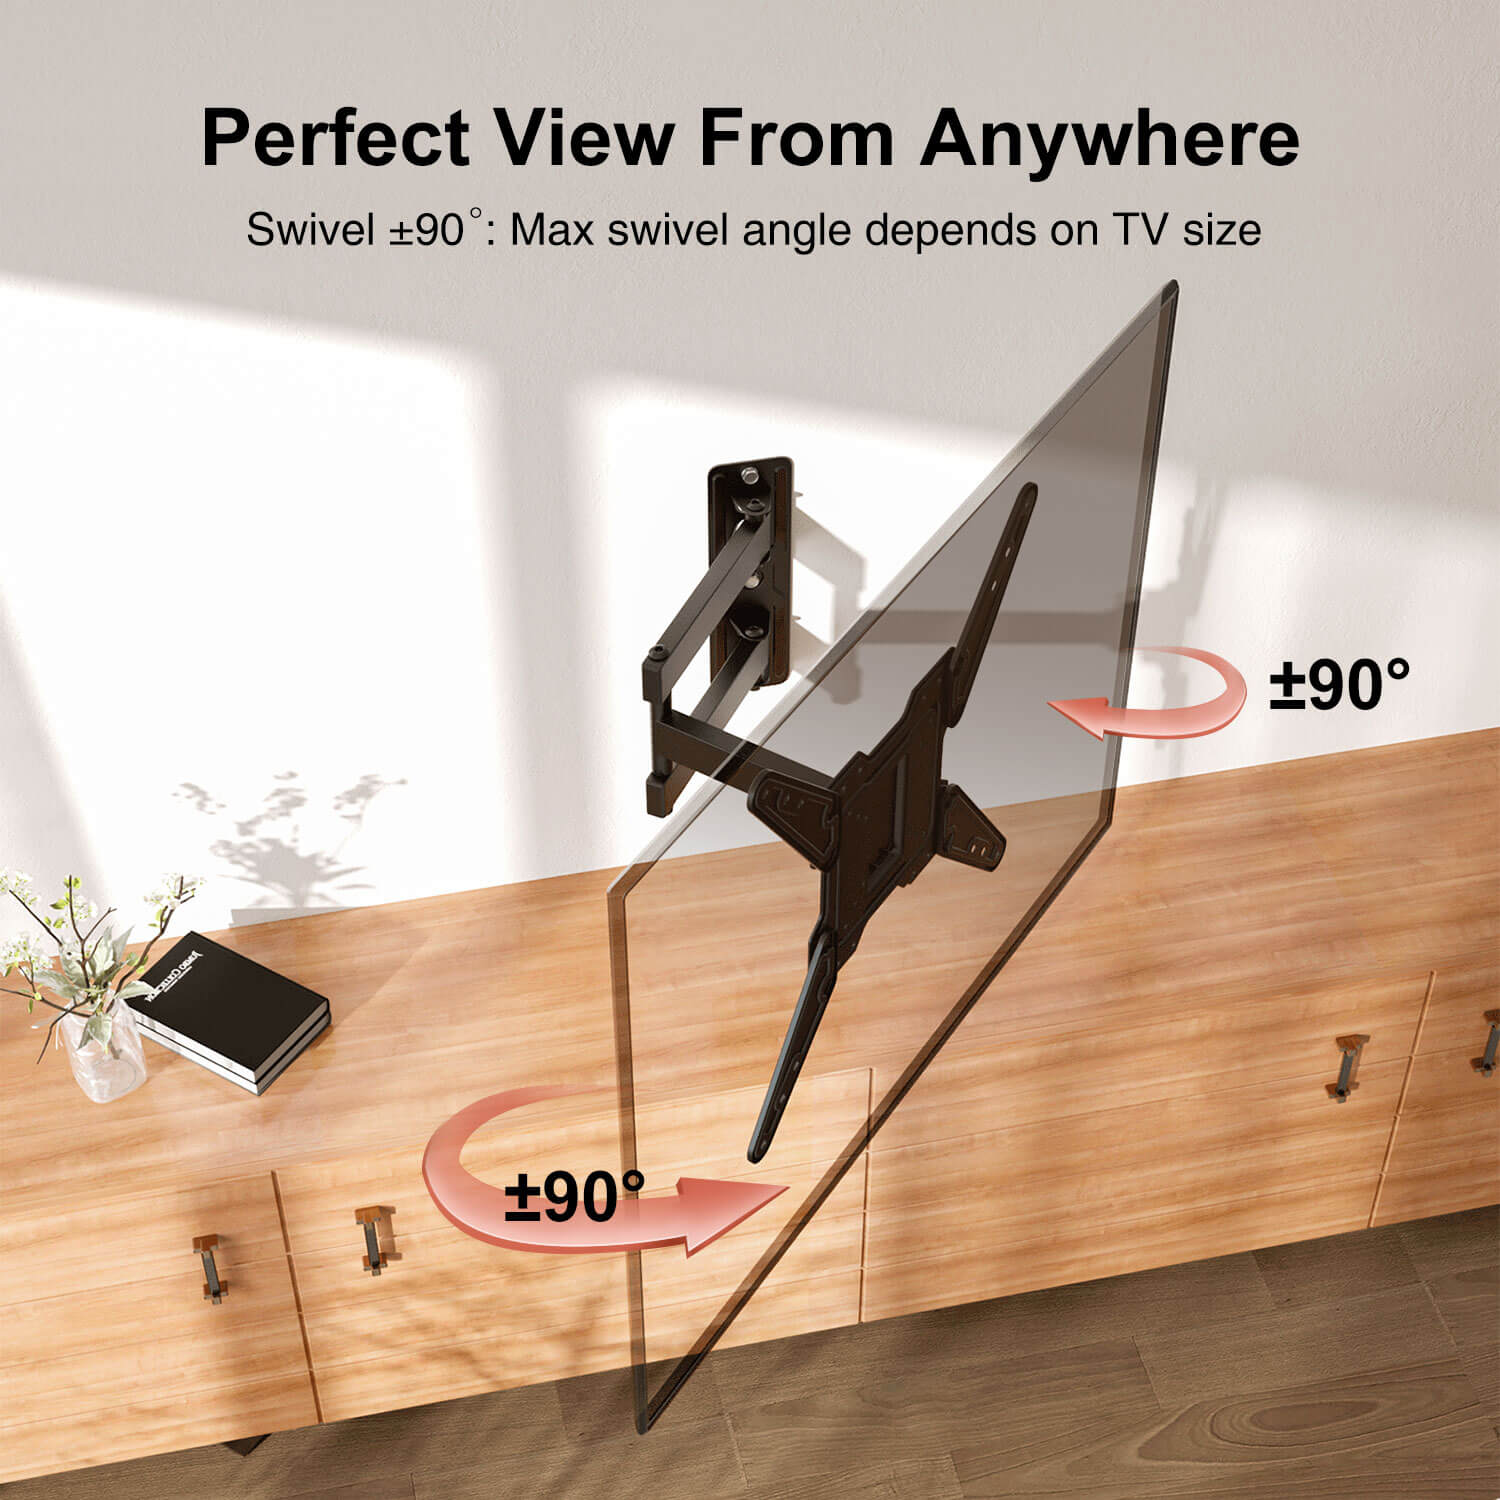 swivel TV mount moves TV 90° left or right for flexible viewing